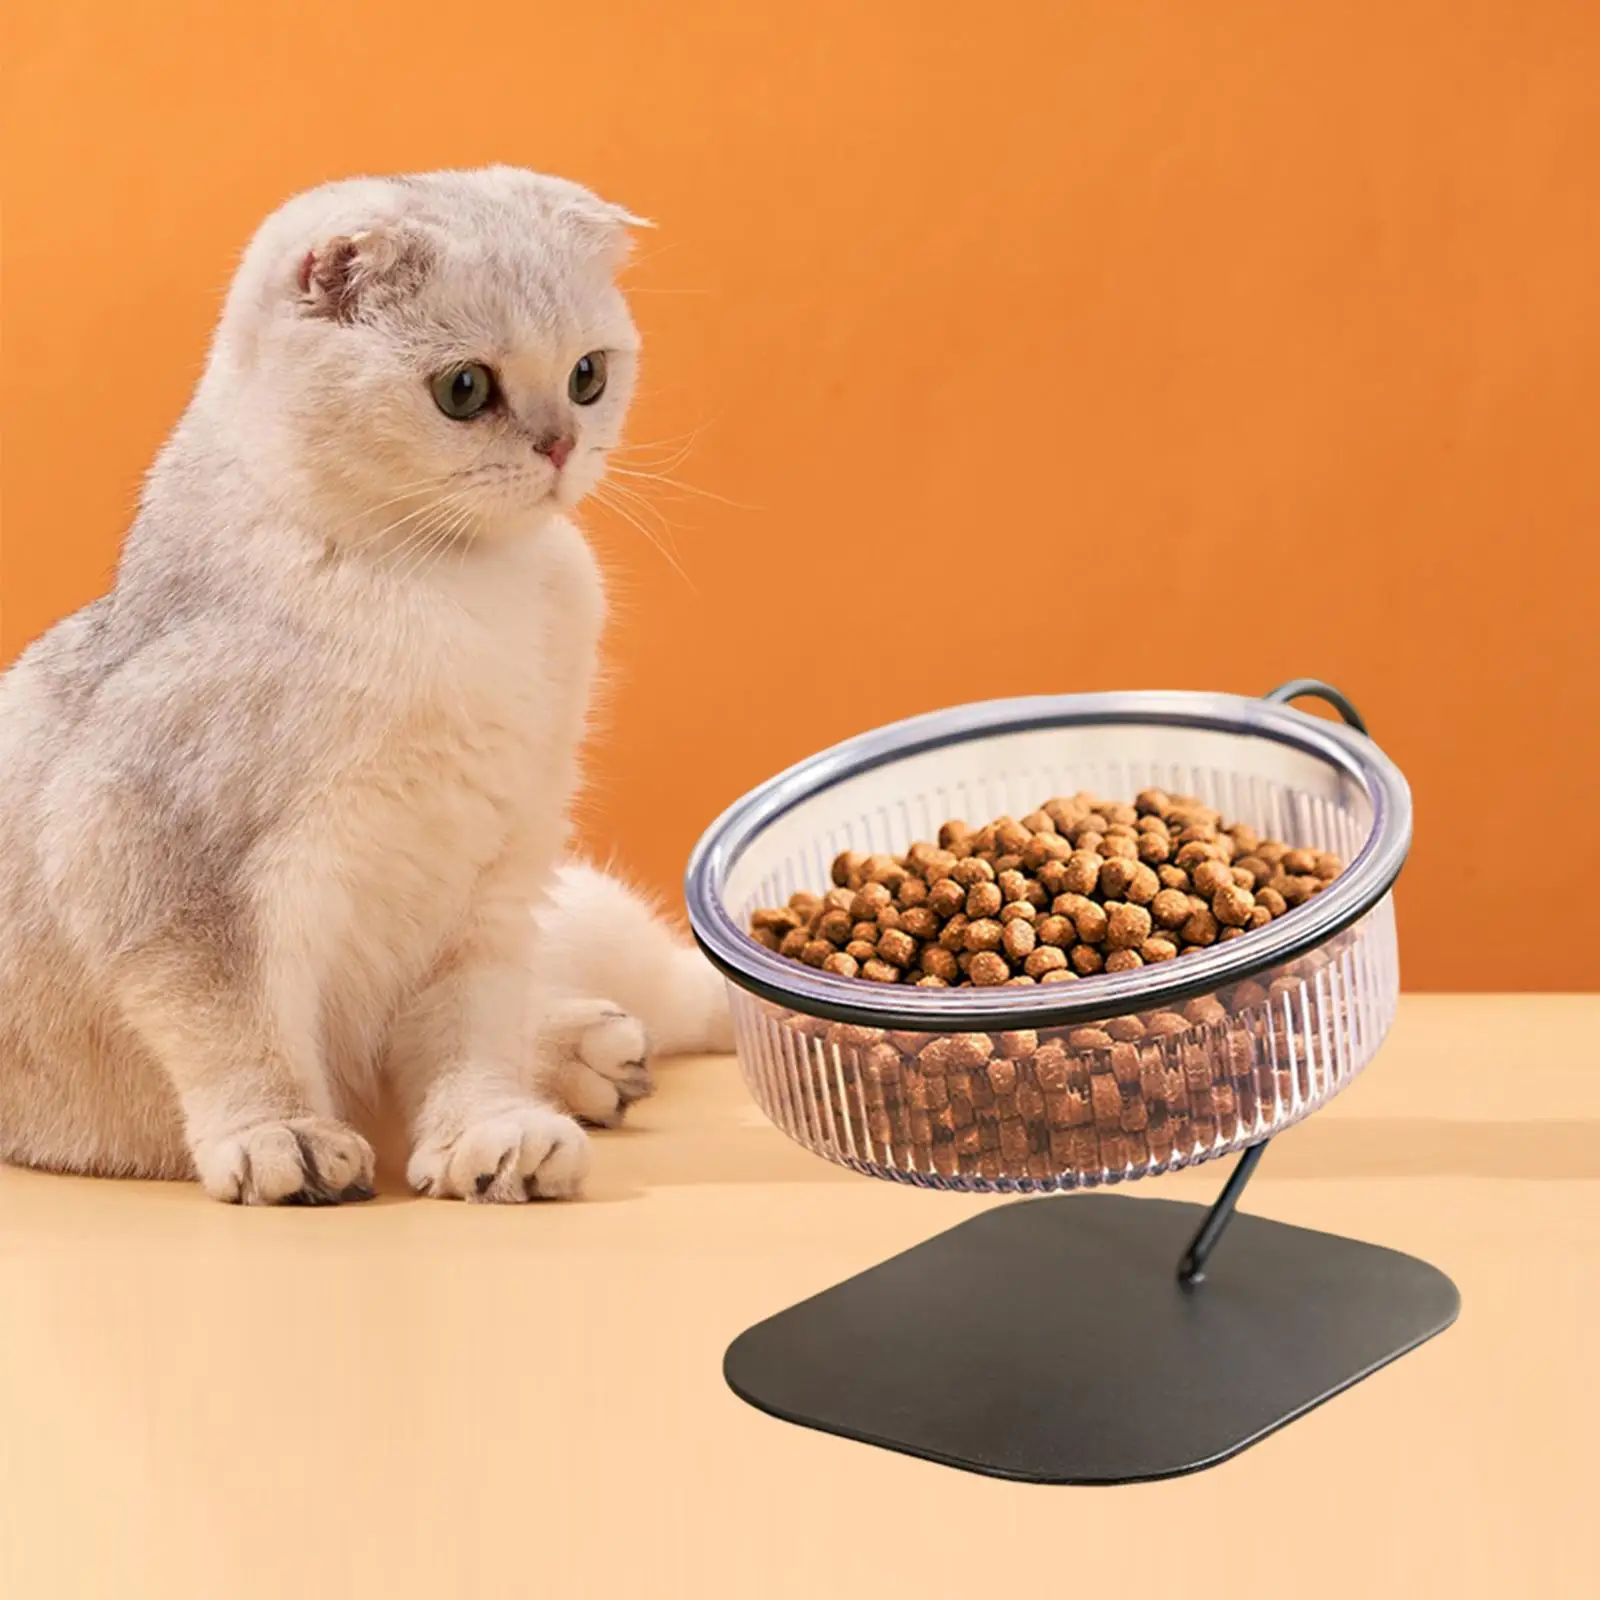 Raised Cat Food Bowl Snack Bowl Water Food Feeder Stable Detachable Portable Pet